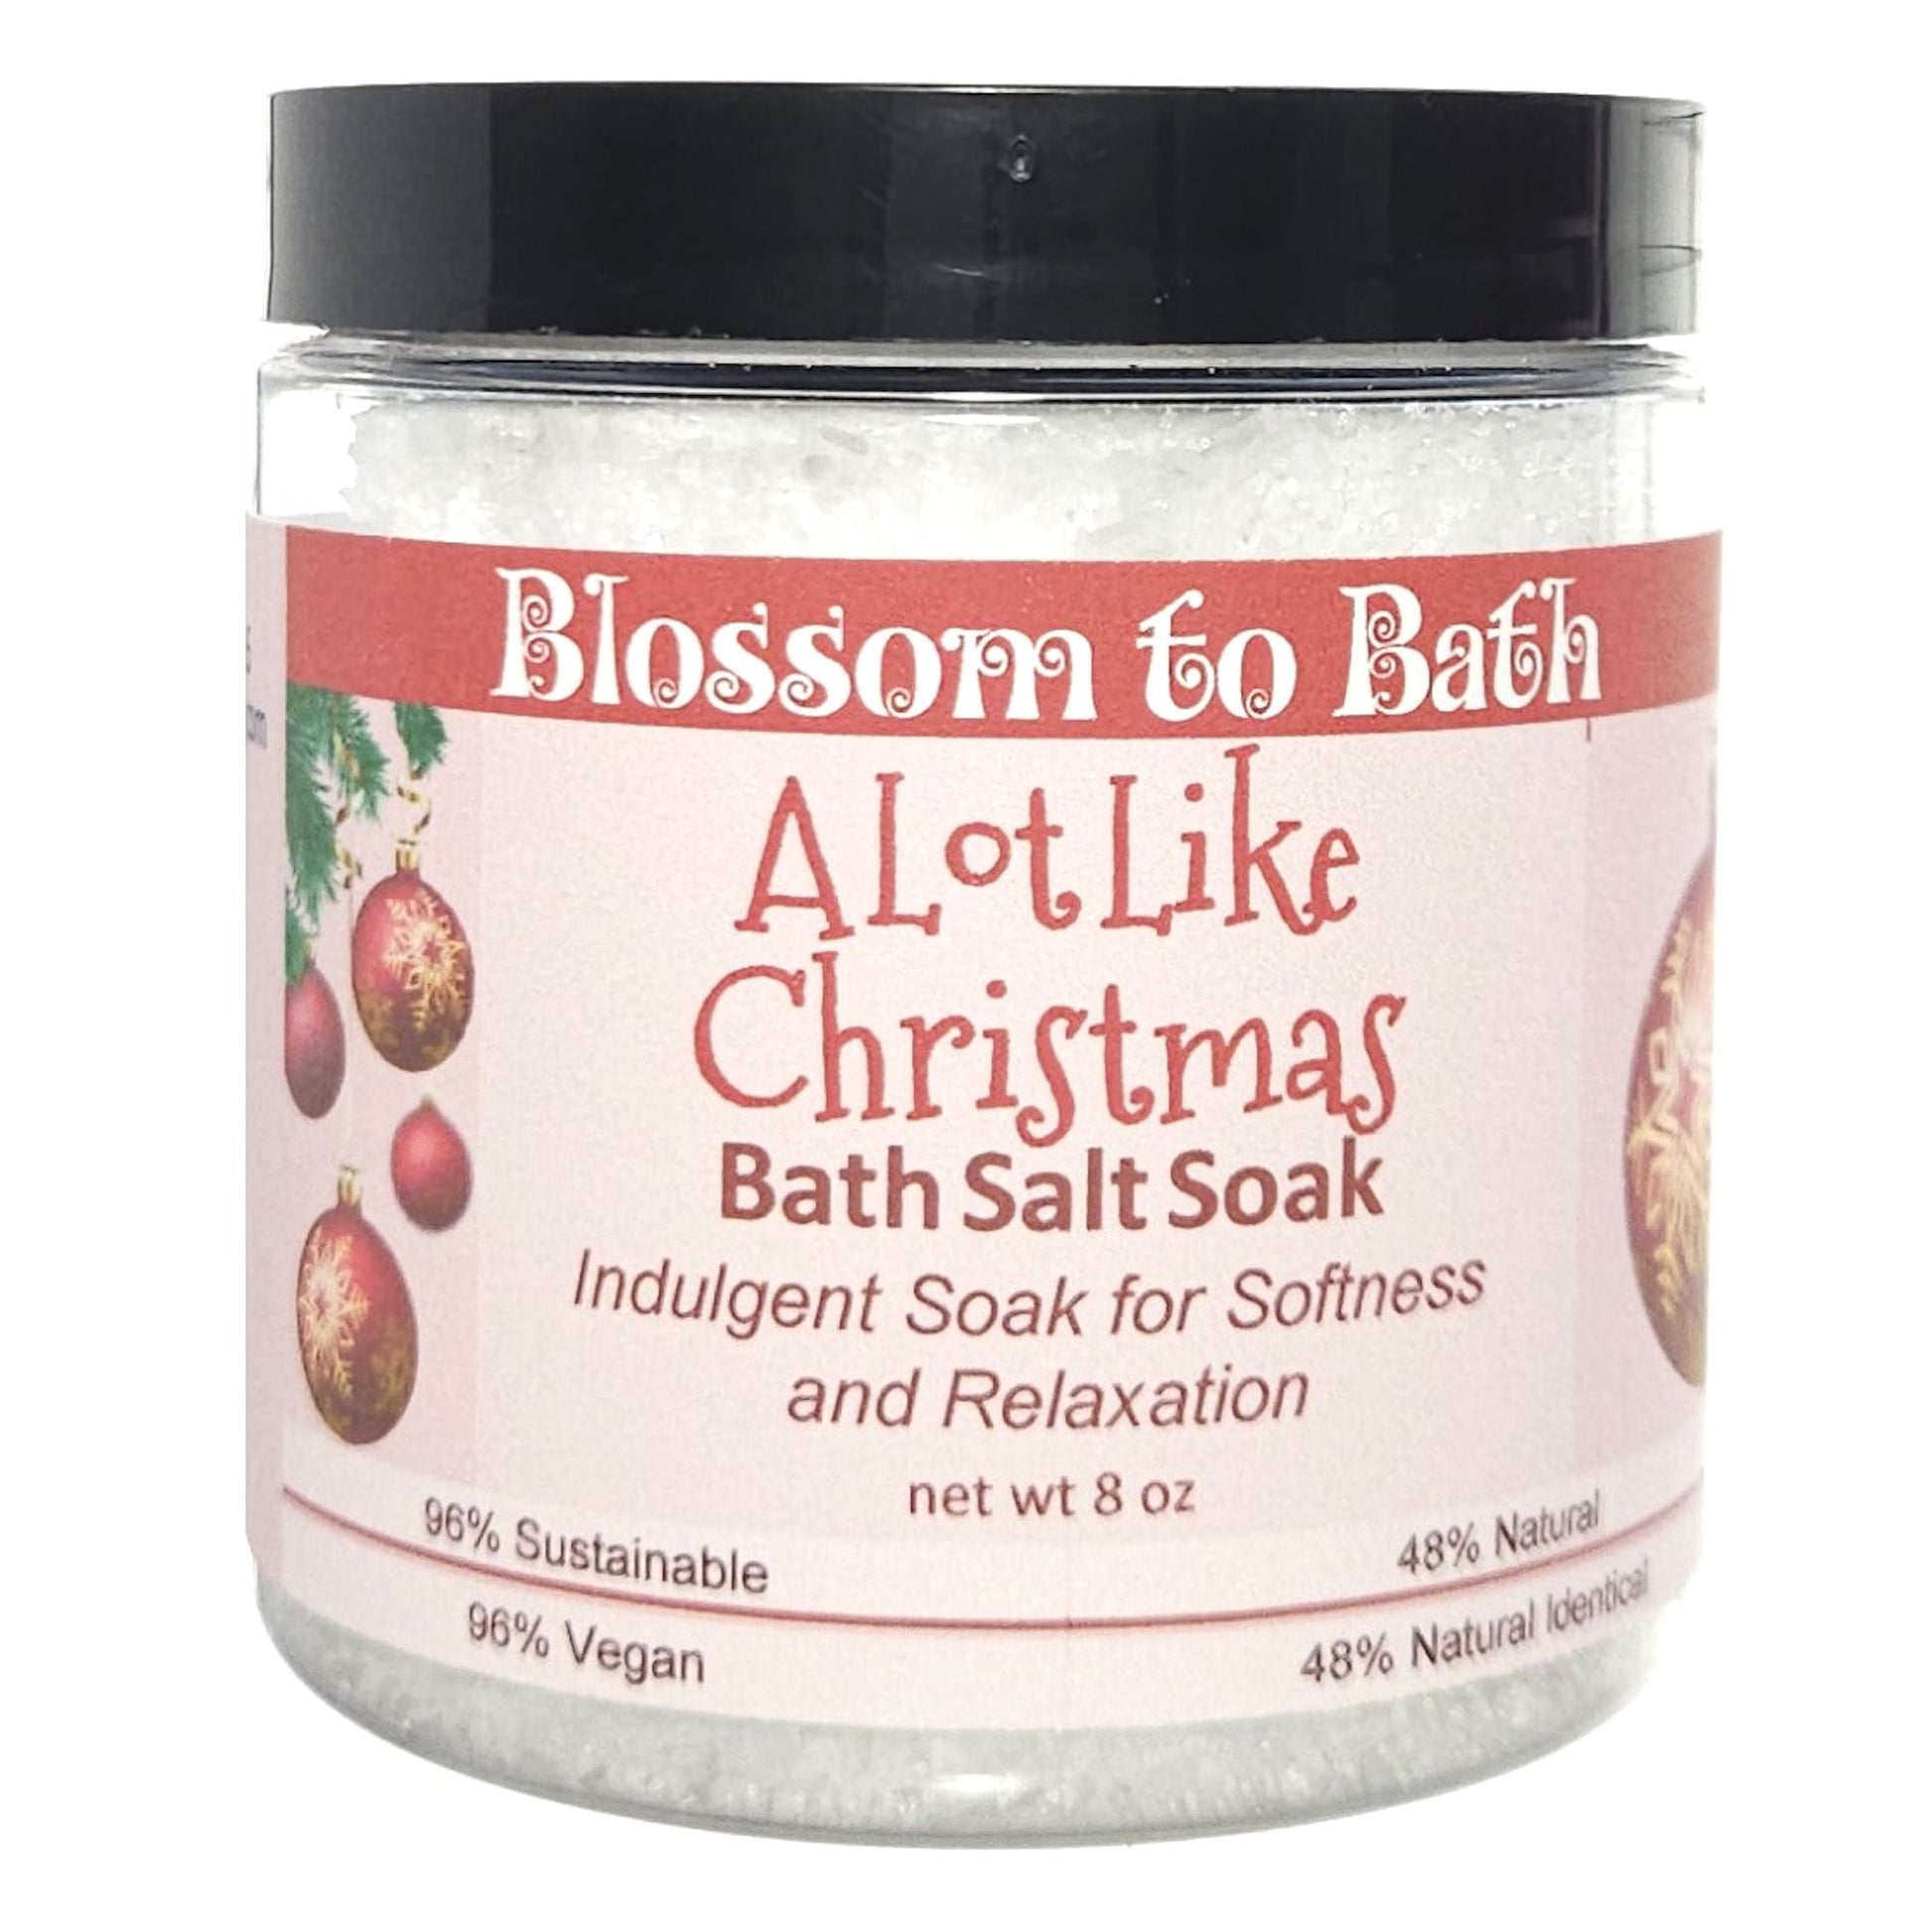 Buy Blossom to Bath A Lot Like Christmas Bath Salt Soak from Flowersong Soap Studio.  Scented epsom salts for a luxurious soaking experience  Find the holiday mood in an instant with this spicy sweet fragrance.